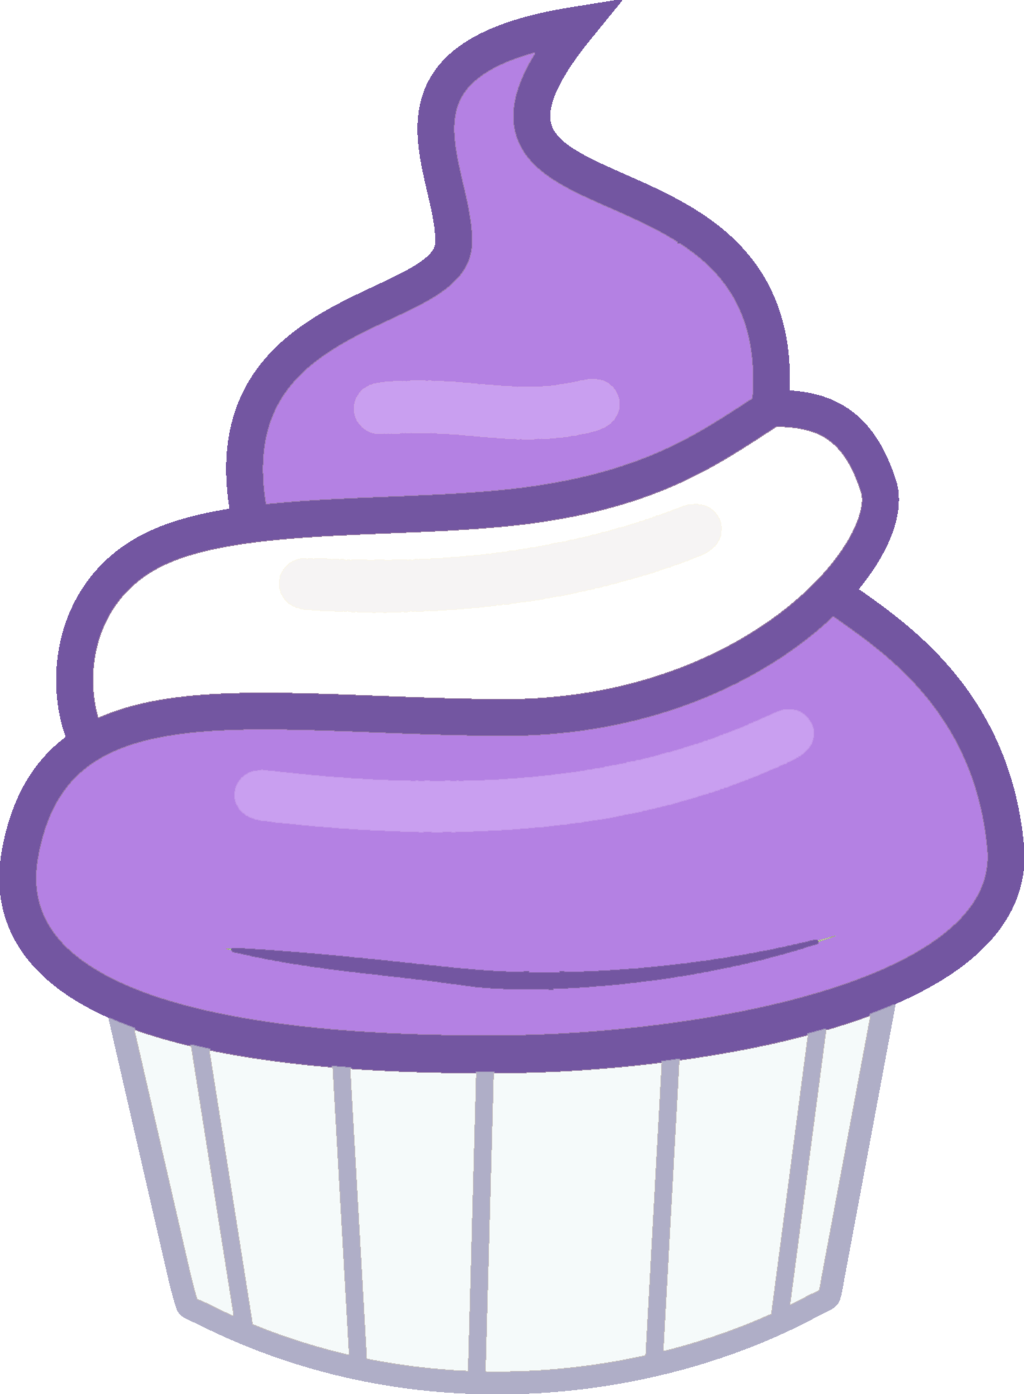 Related Image - Purple Cupcake Logo Png (1024x1394)